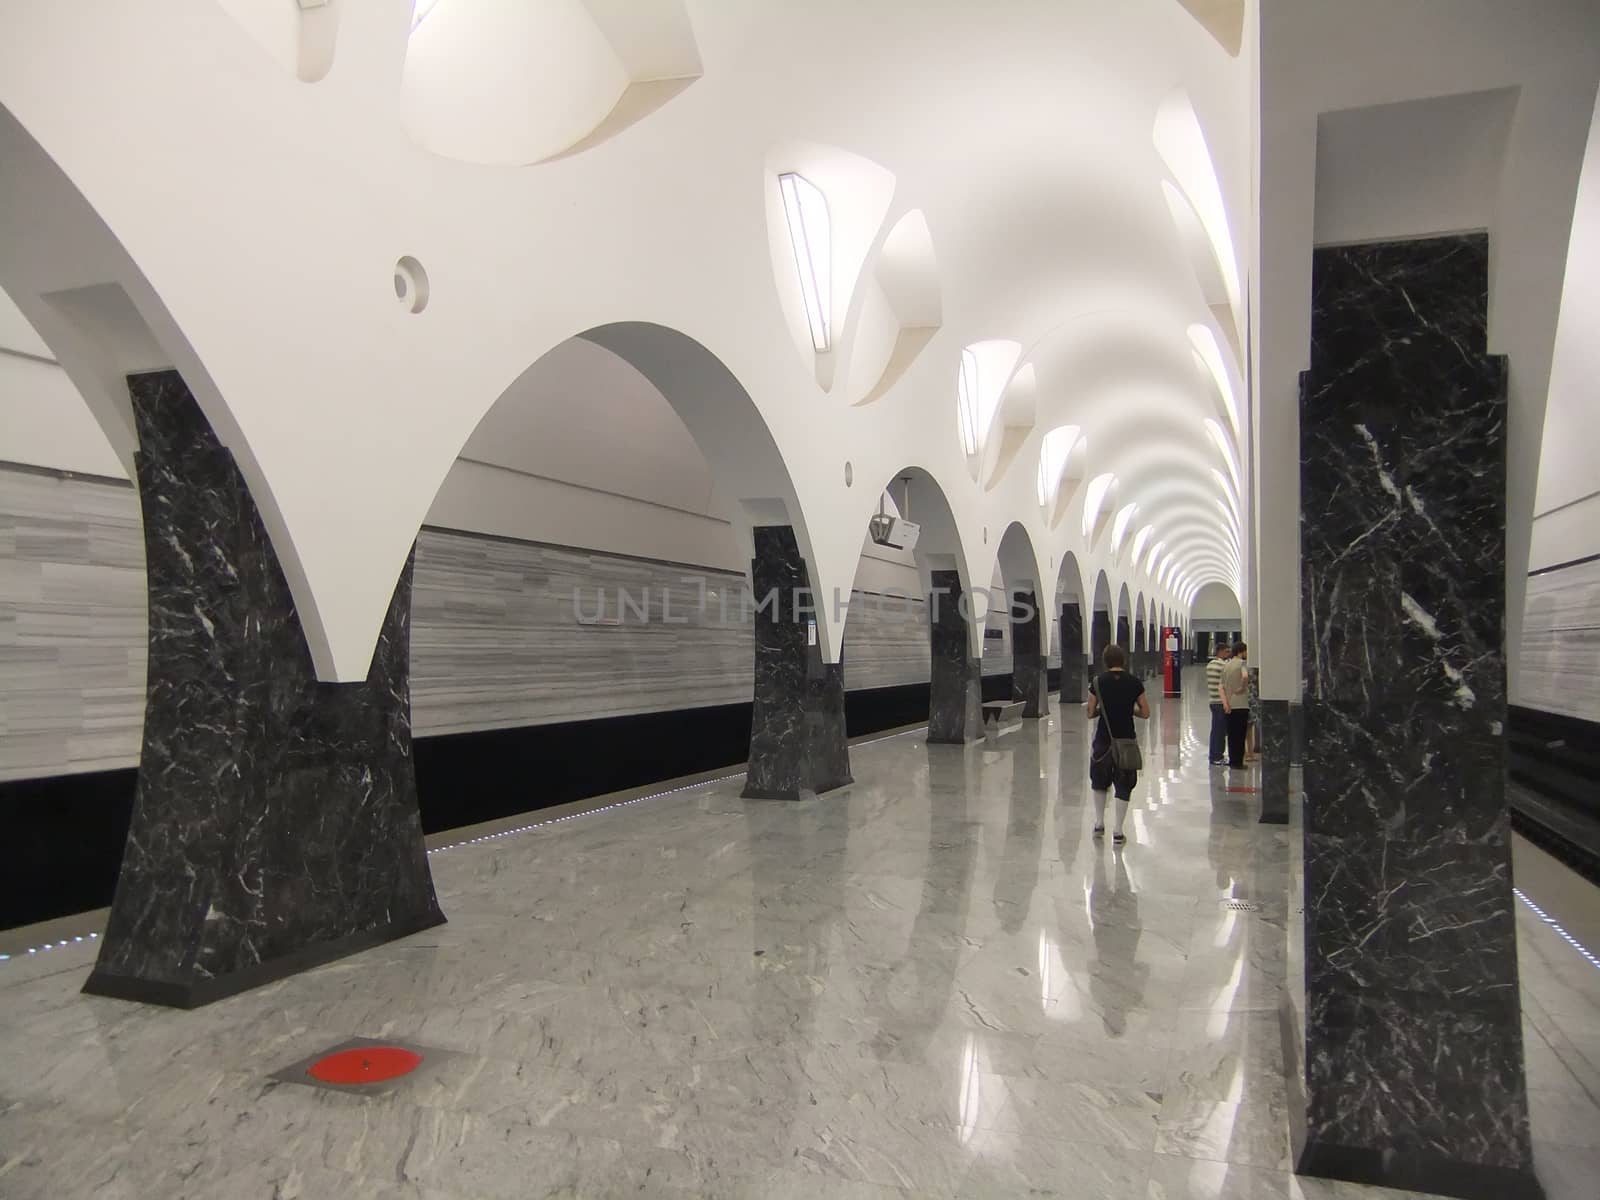 Metro station, Moscow, Russia by donya_nedomam